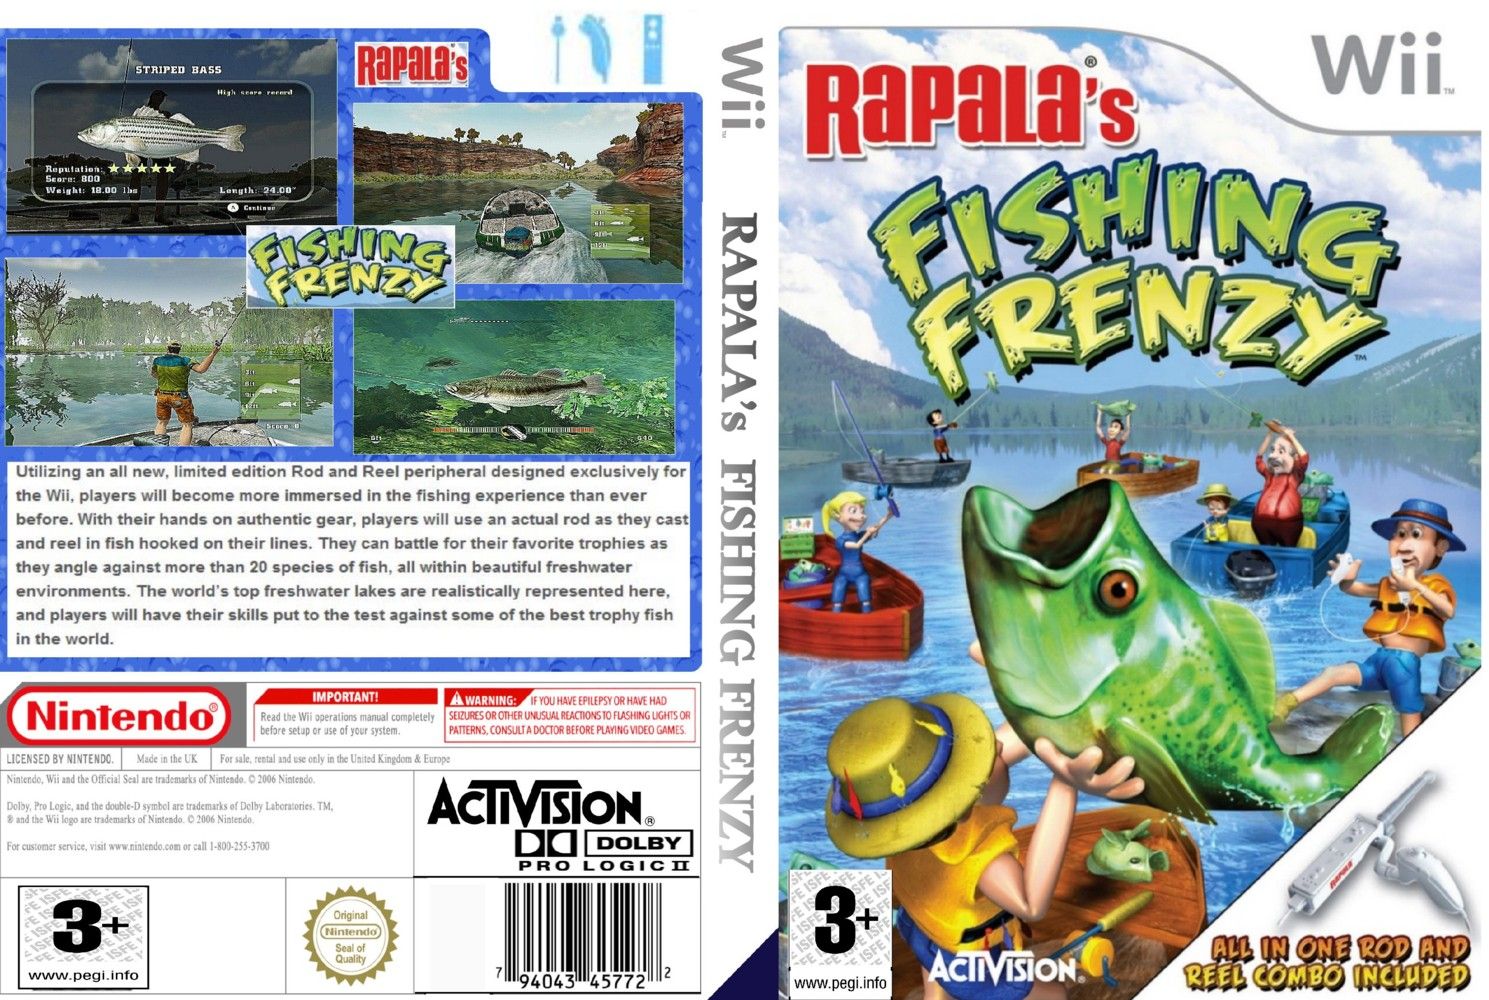 Rapalas Fishing Frenzy PAL Wii FULL, Wii Covers, Cover Century